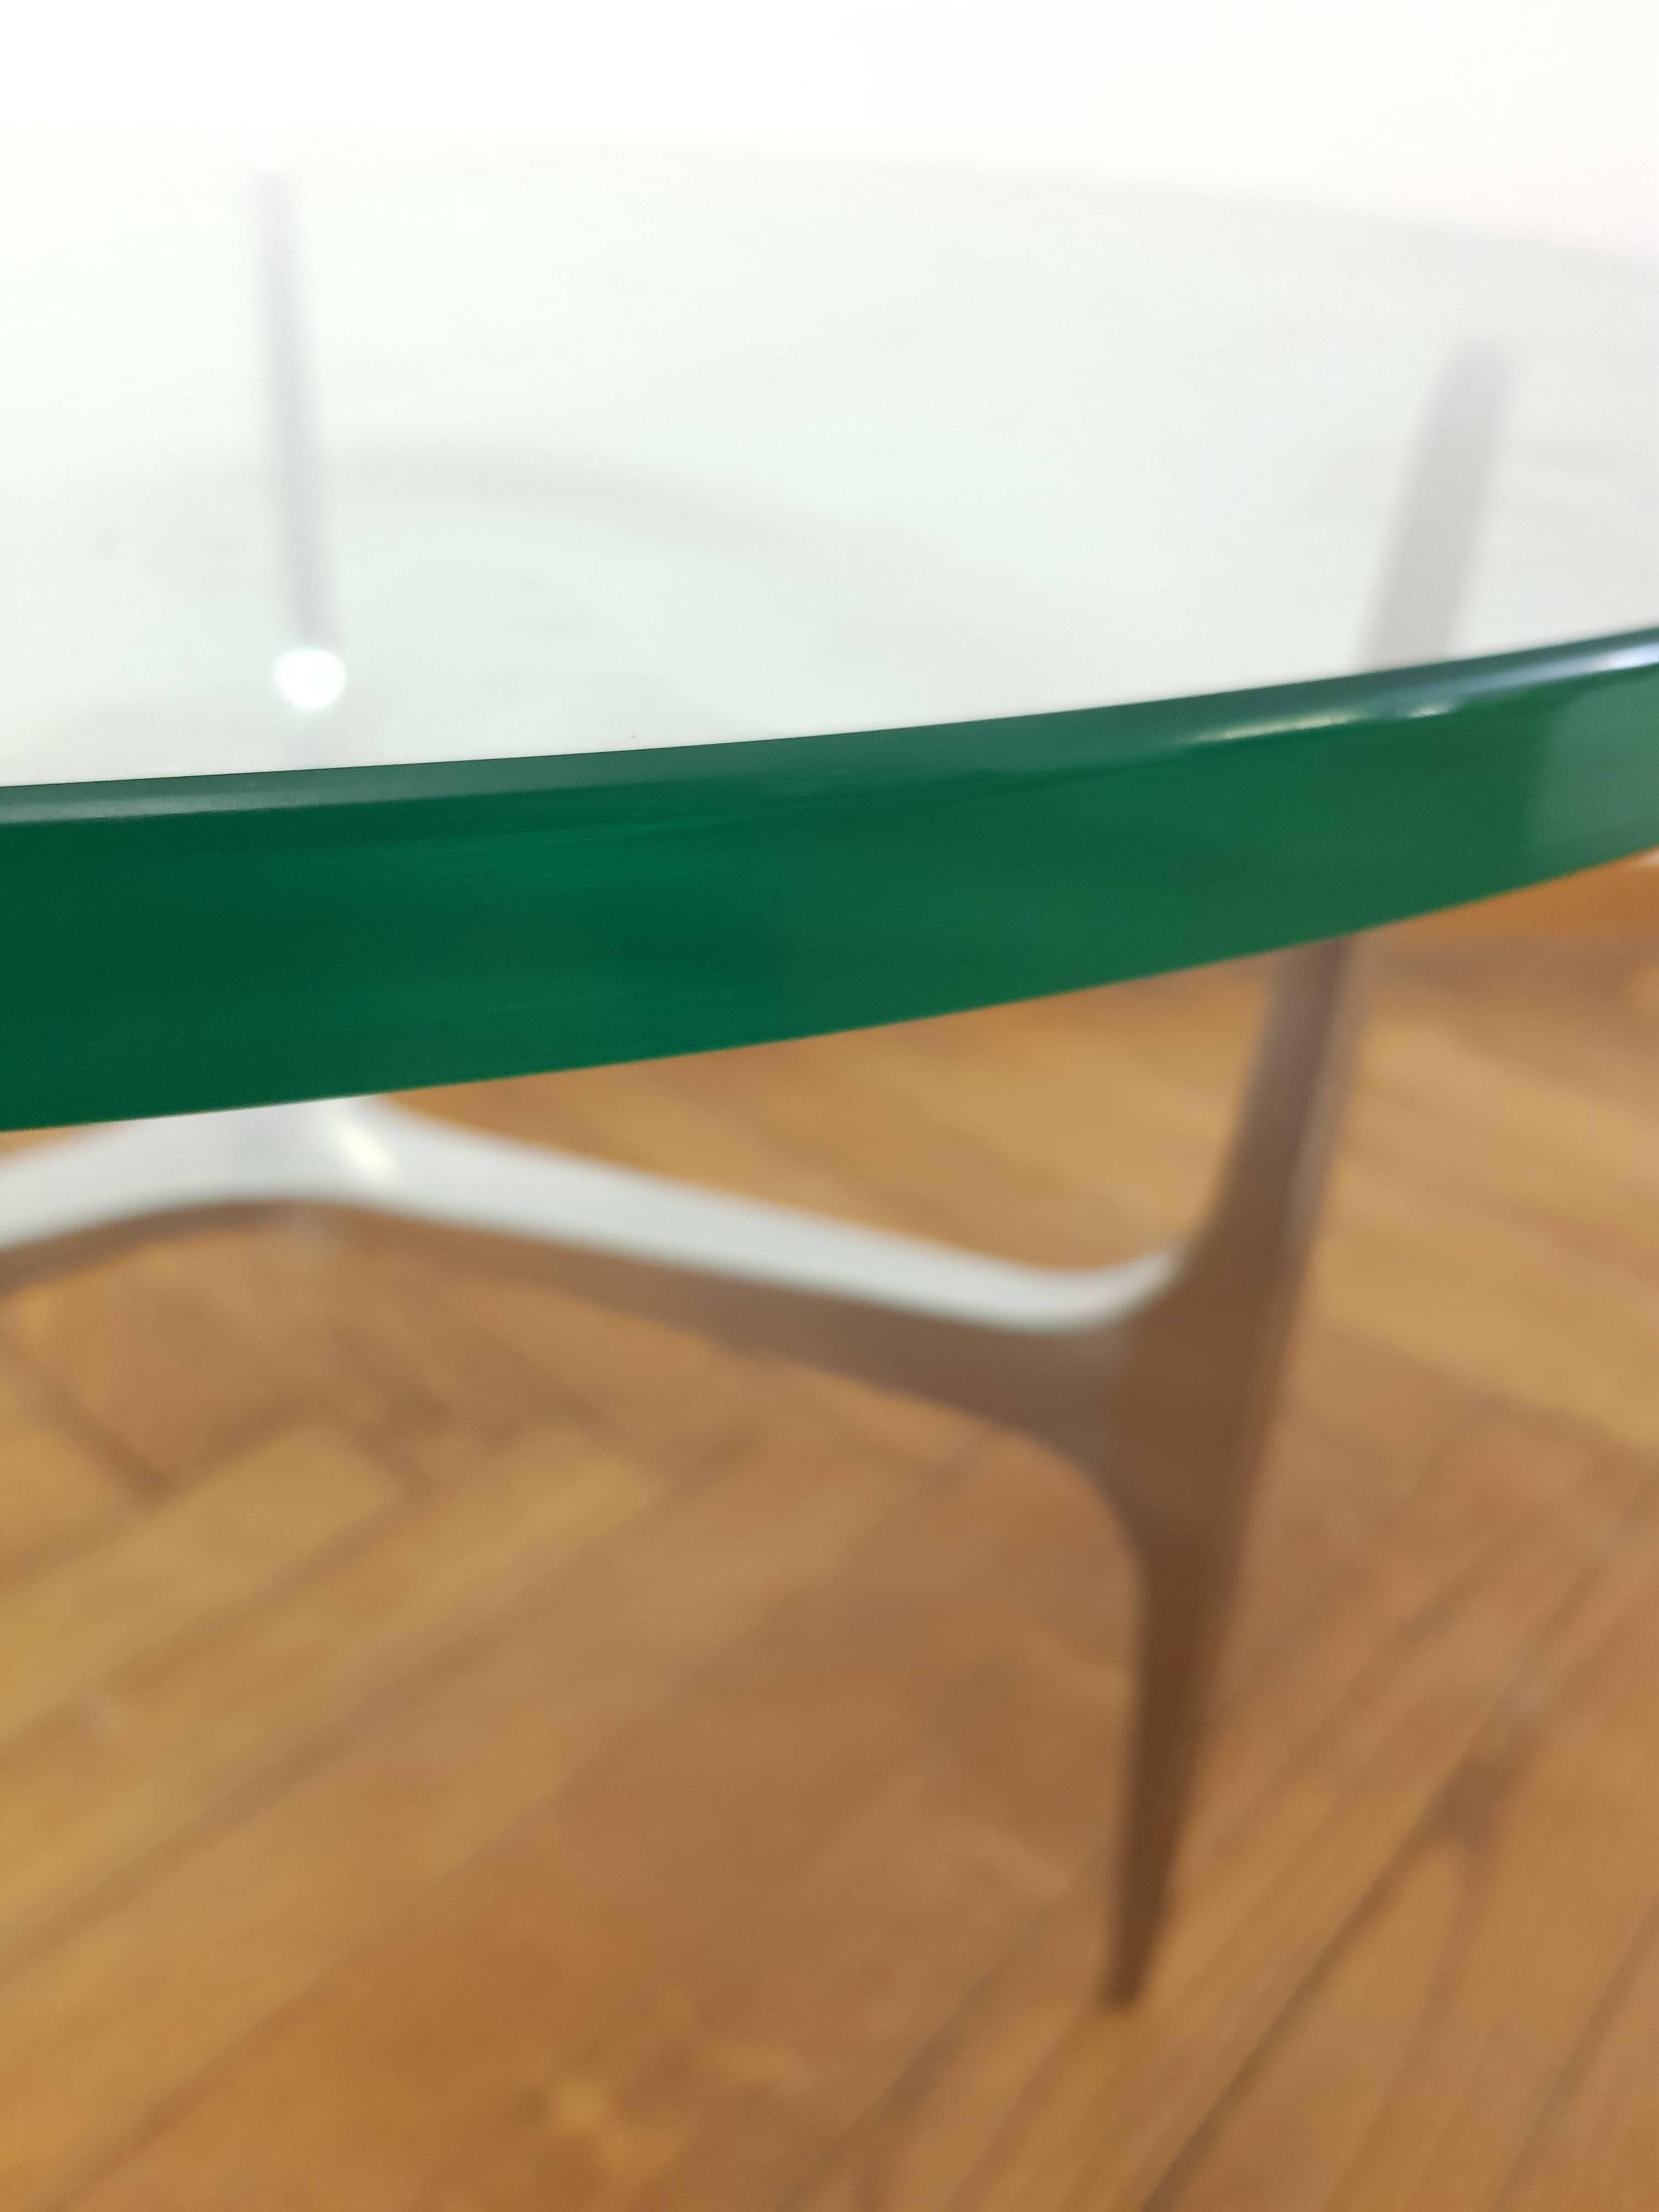 Beautiful coffee table, designed by Knut Hesterberg. It was produced by Ronald Schmitt in Germany in the 1960s. The glass plate is very thick and the solid aluminium legs are high quality.